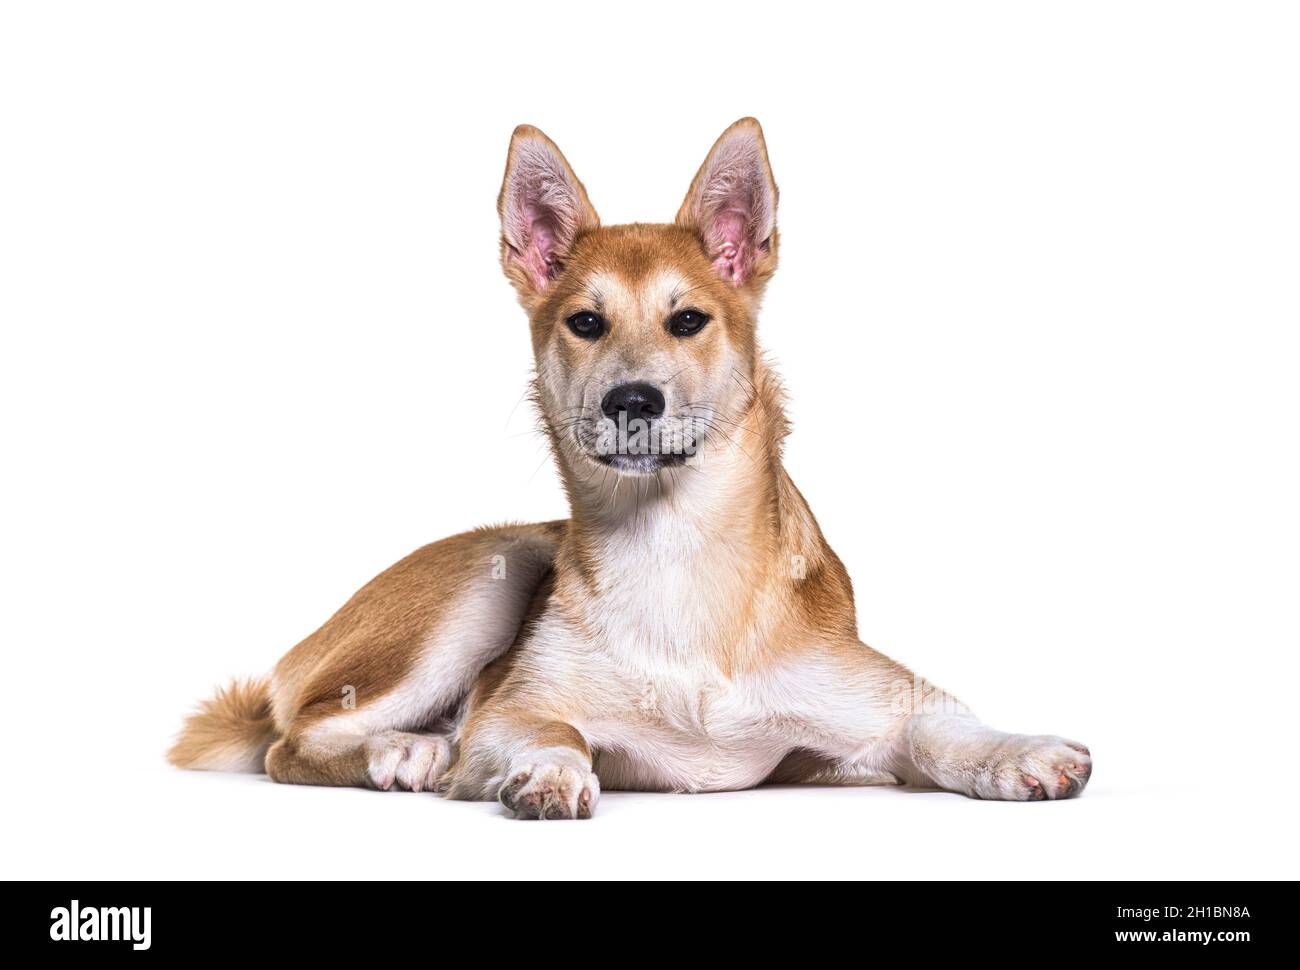 Alert Crossbreed dog lying down looking at camera, isolated on white Stock Photo